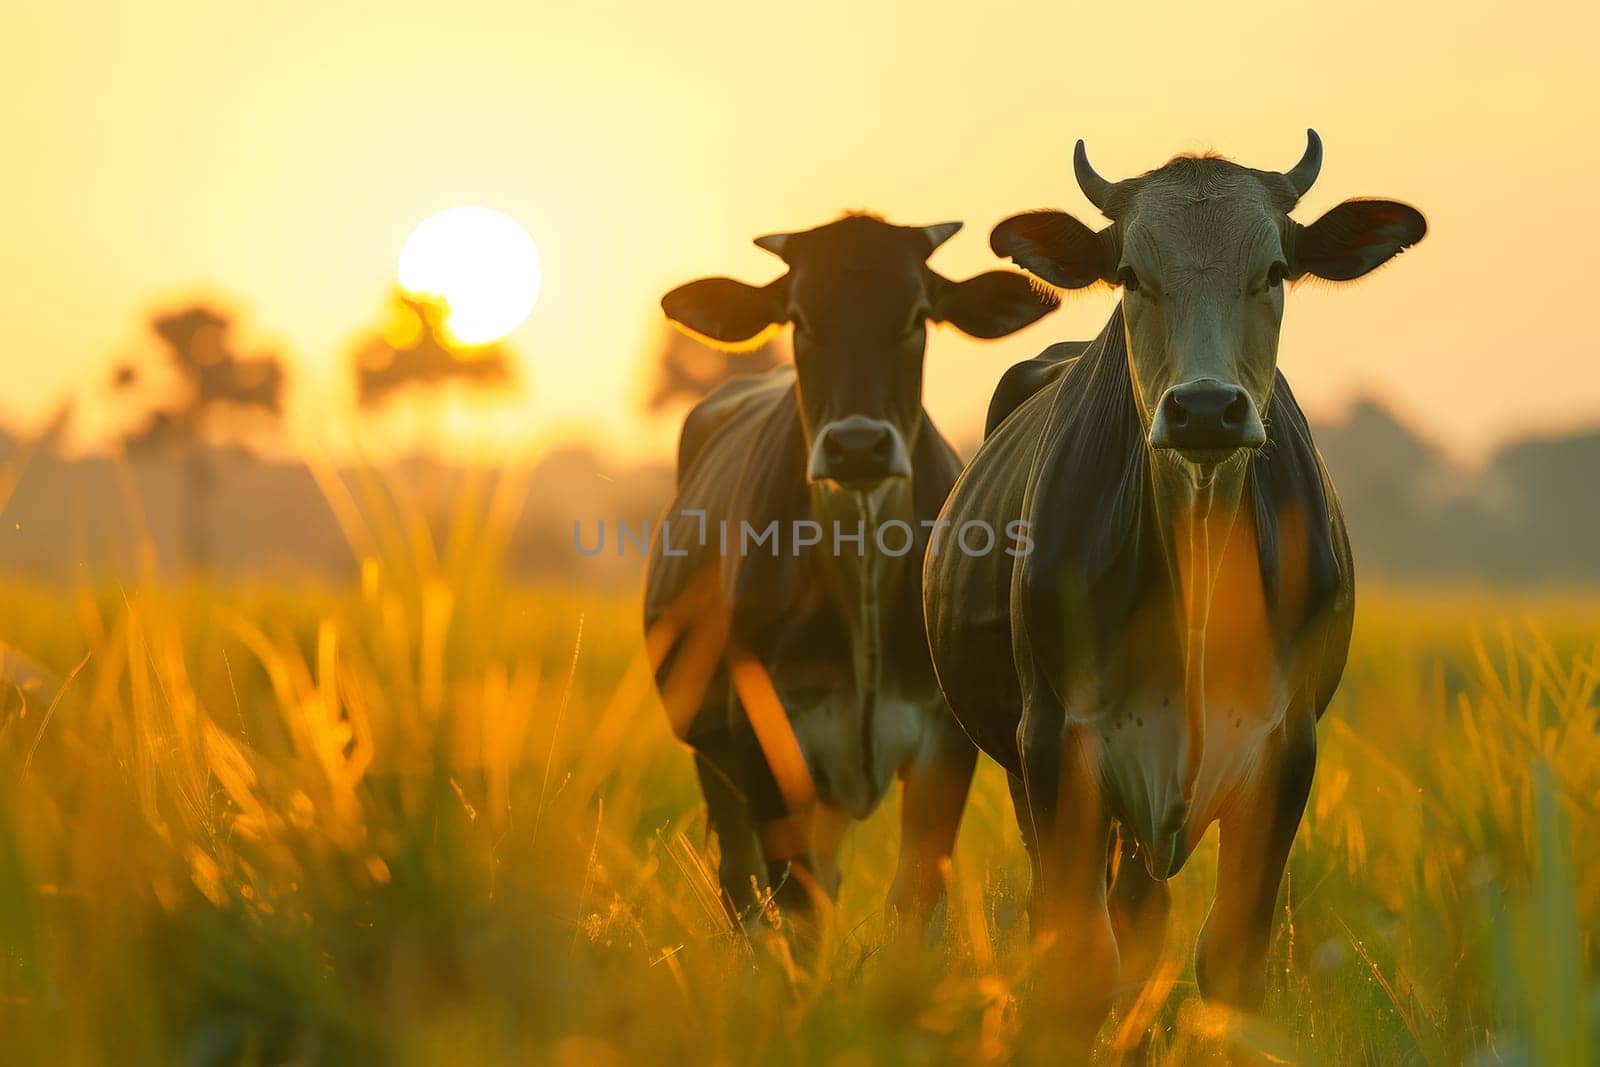 Cow farm, An image of cows in a meadow during the summer at sunset, Agriculture animal.